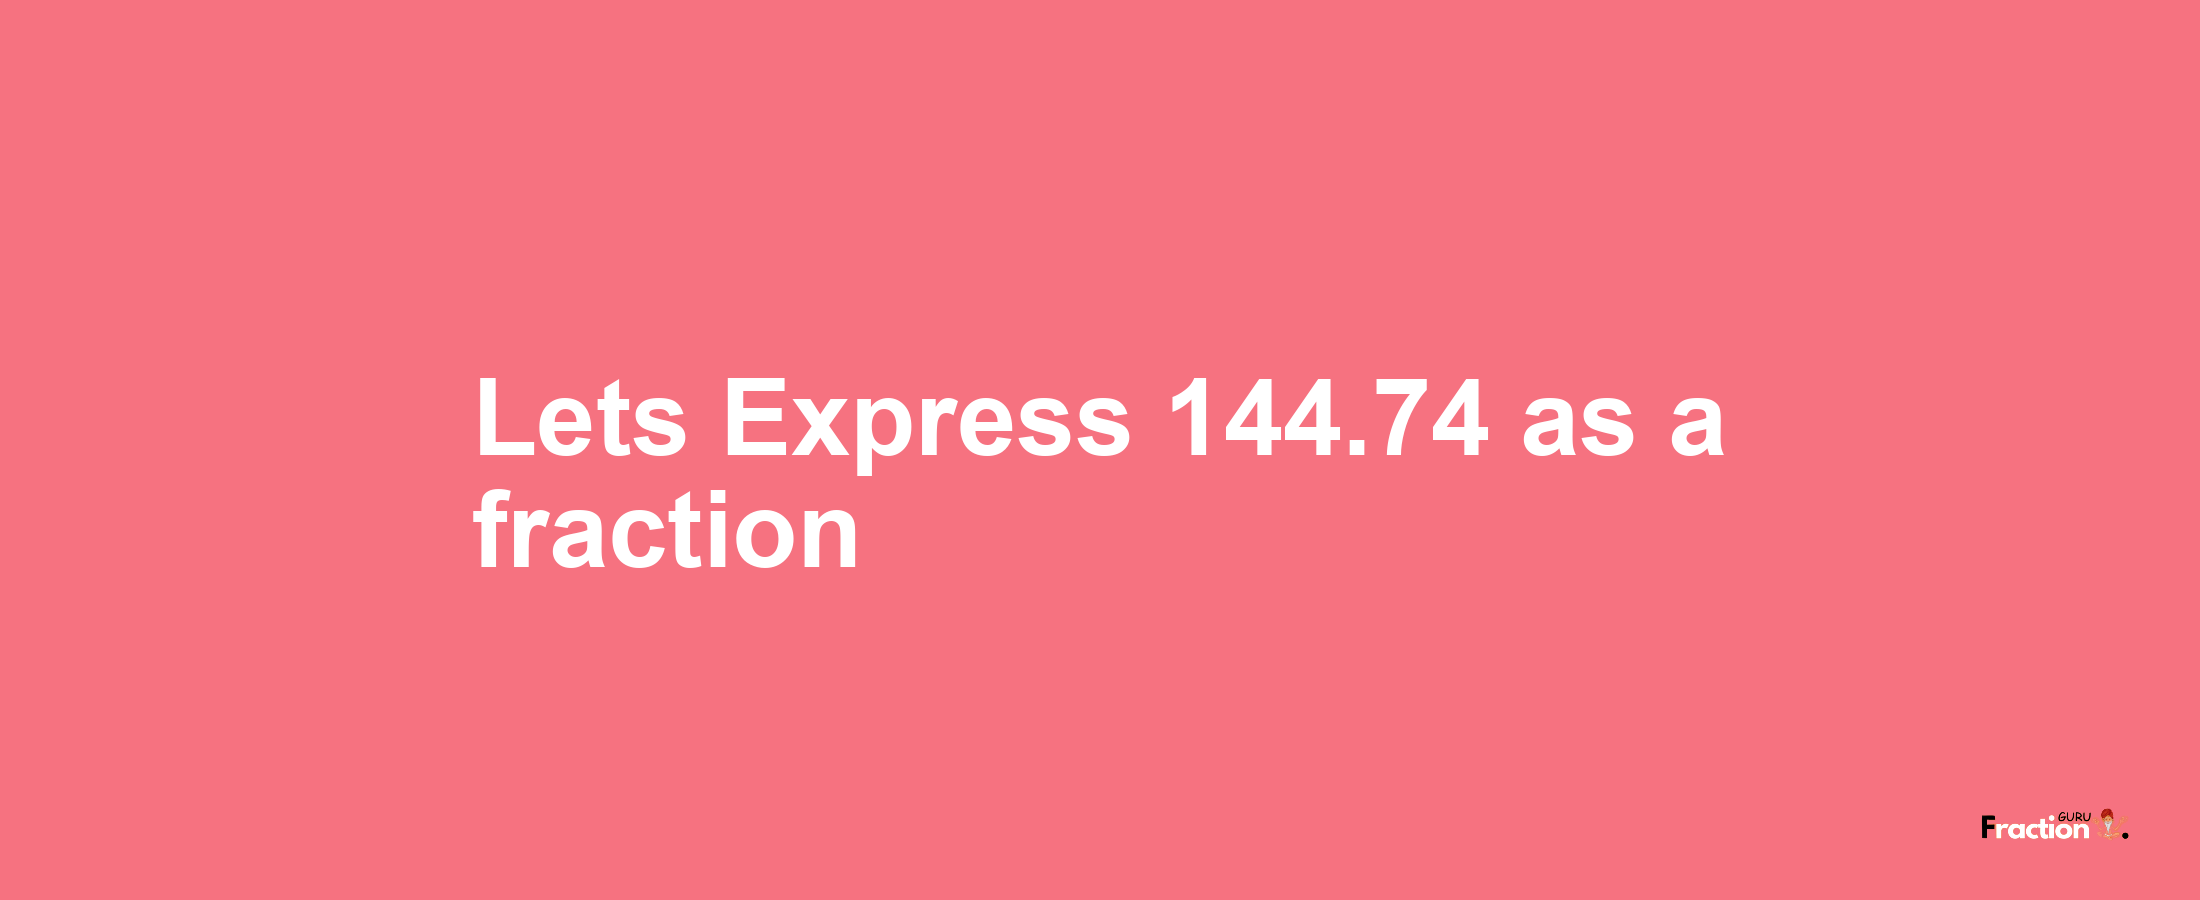 Lets Express 144.74 as afraction